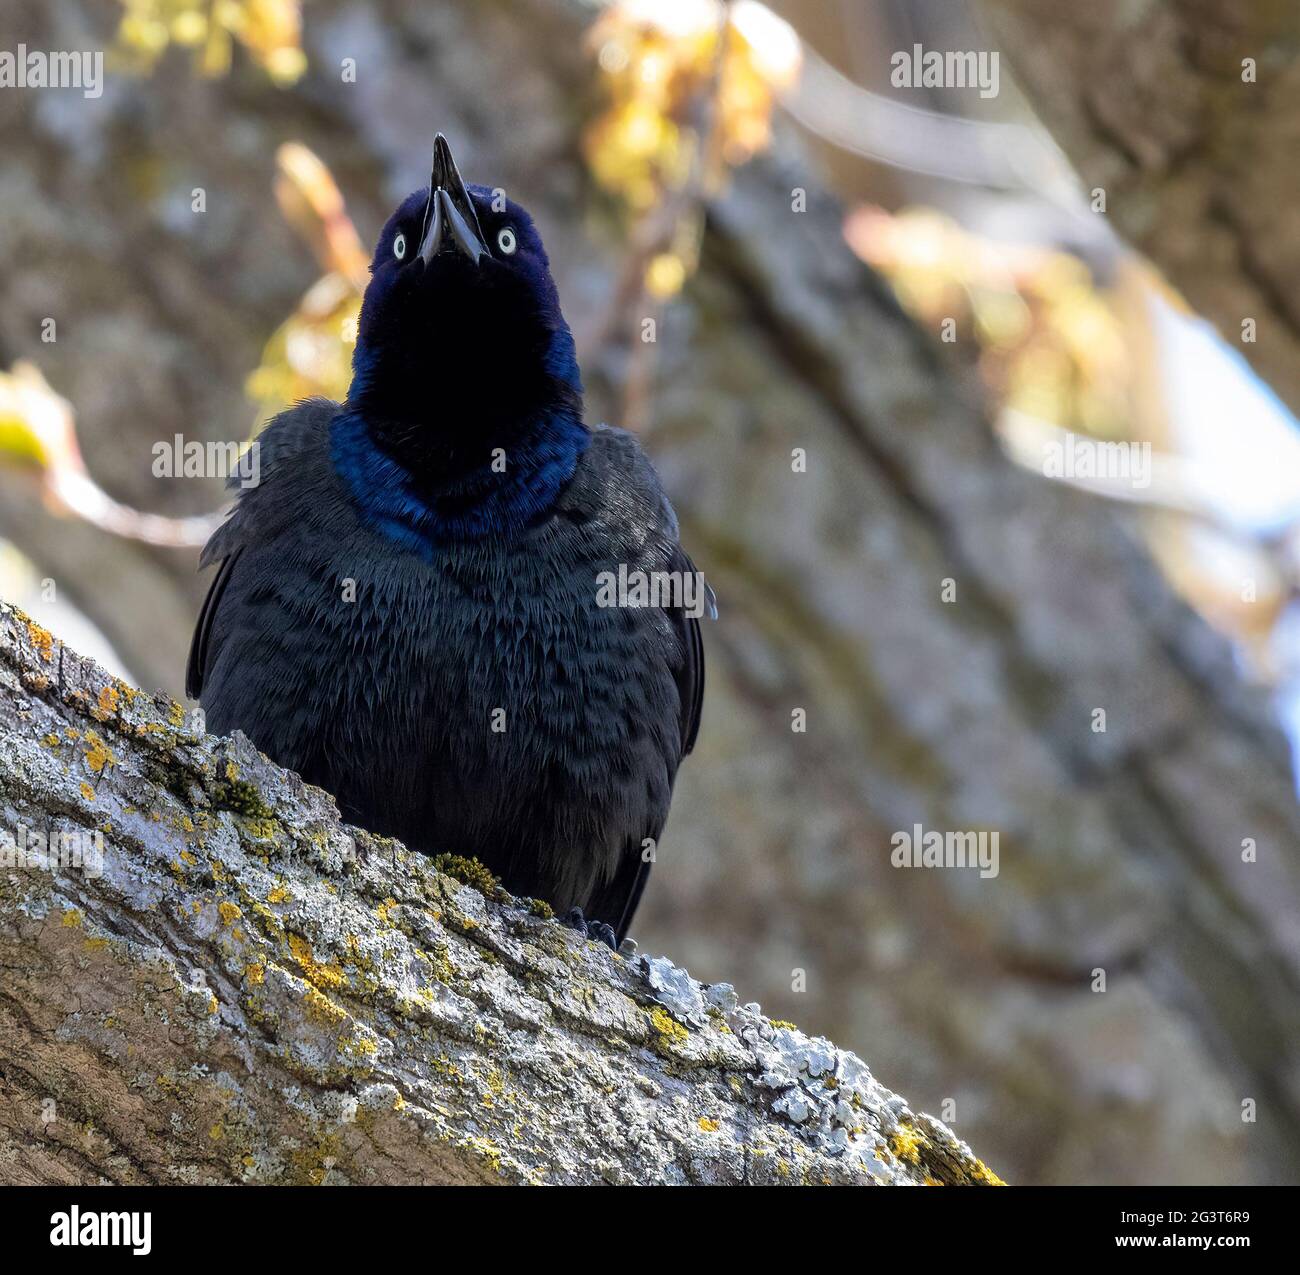 Common Grackle Quiscalus quiscula Perched On A Branch Stock Photo